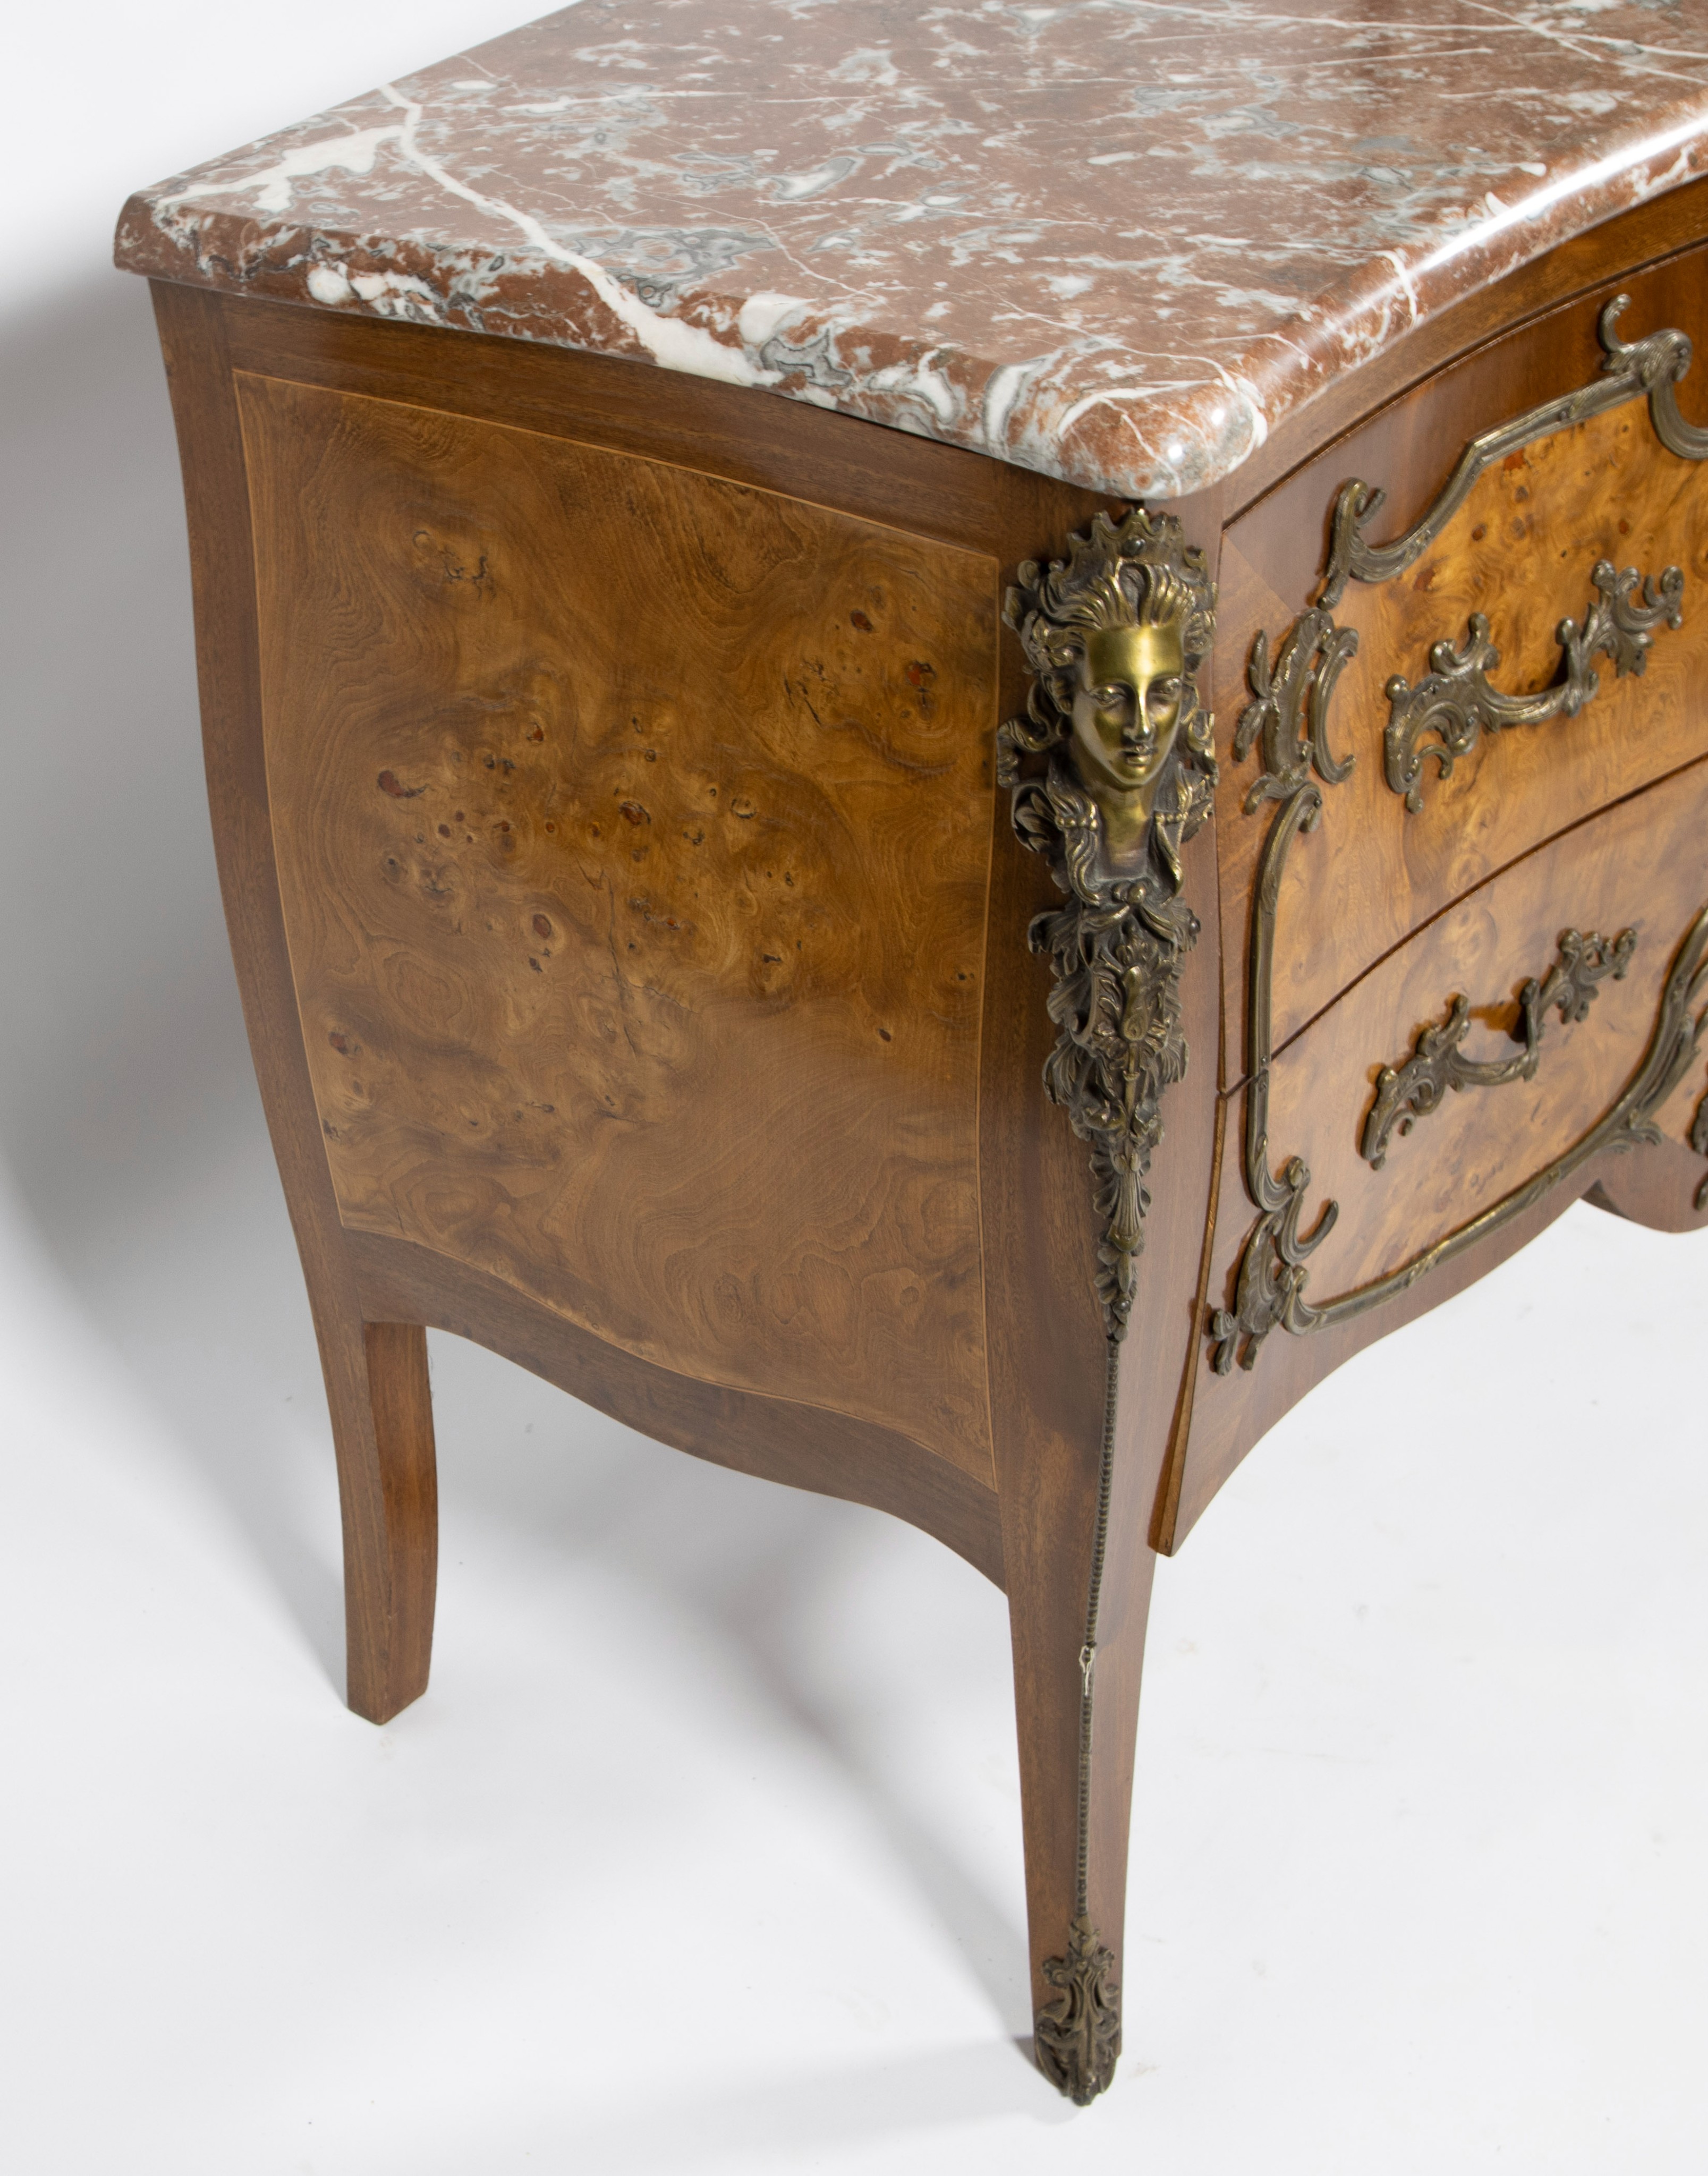 Chest of drawers style Louis XV with bronze ornaments and marble top - Image 4 of 4